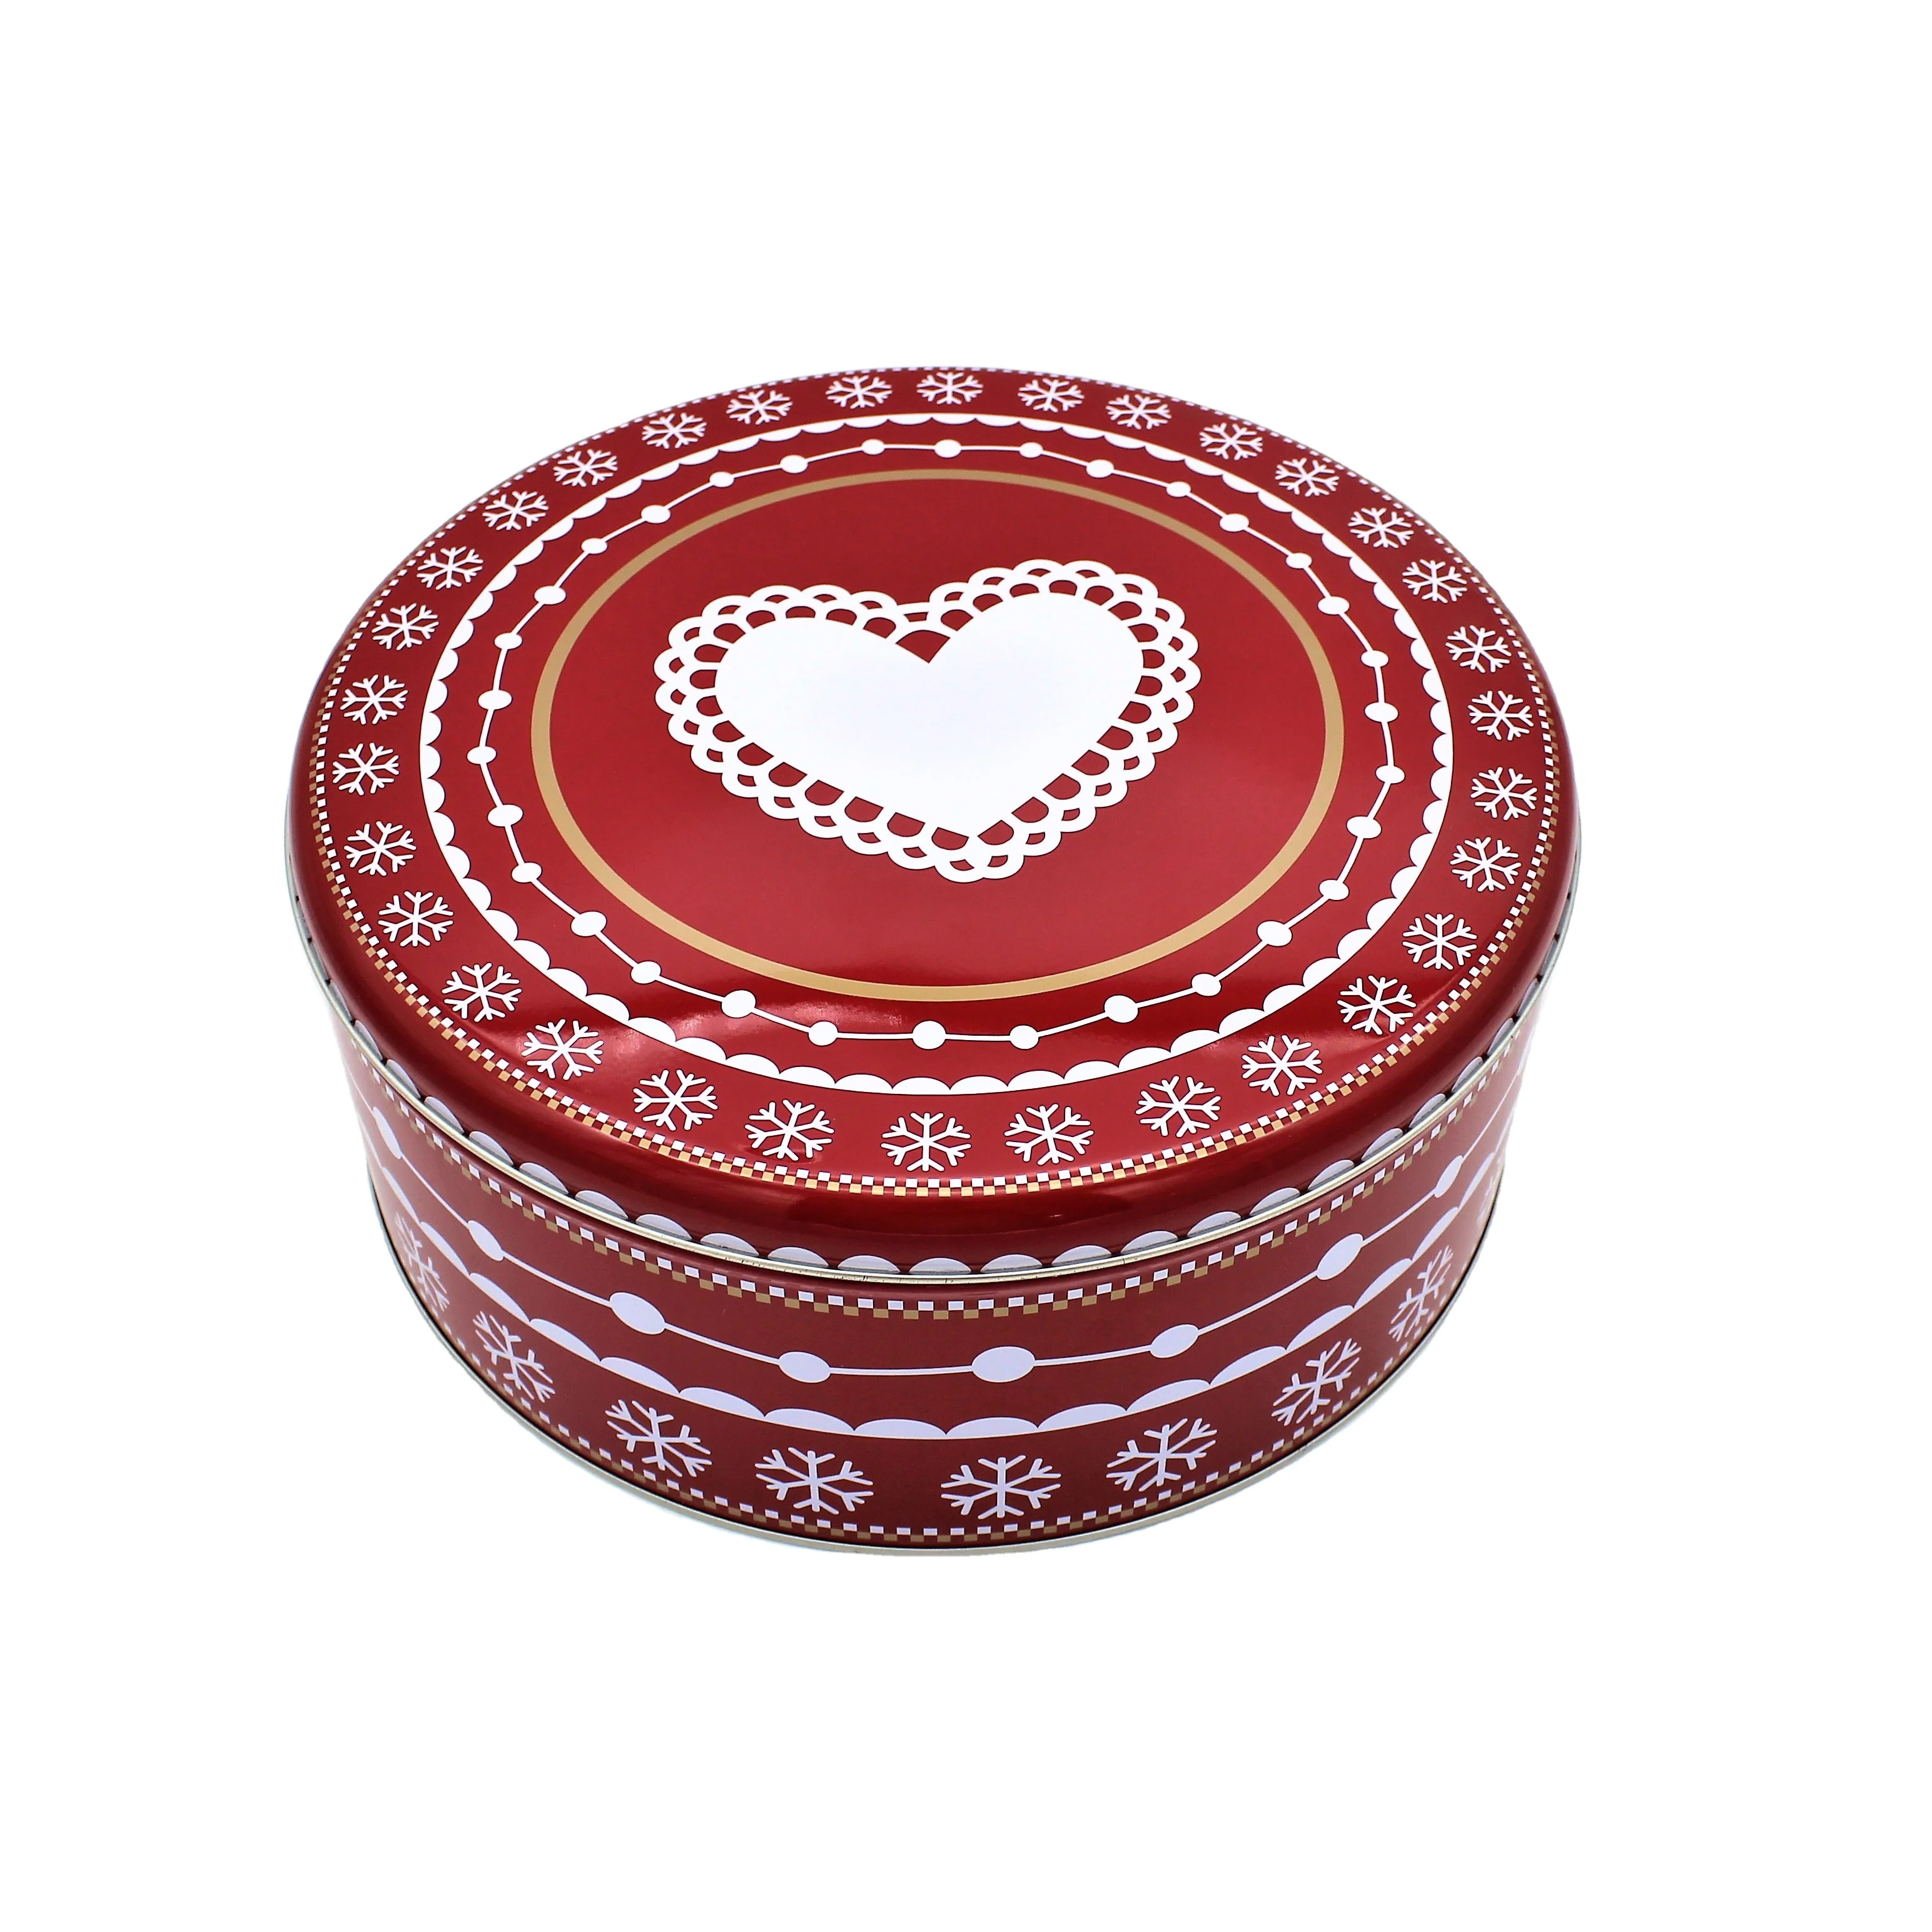 Round Shaped Christmas Tea Cans Metal Chocolate Tin Box For Gift Cookie Cake